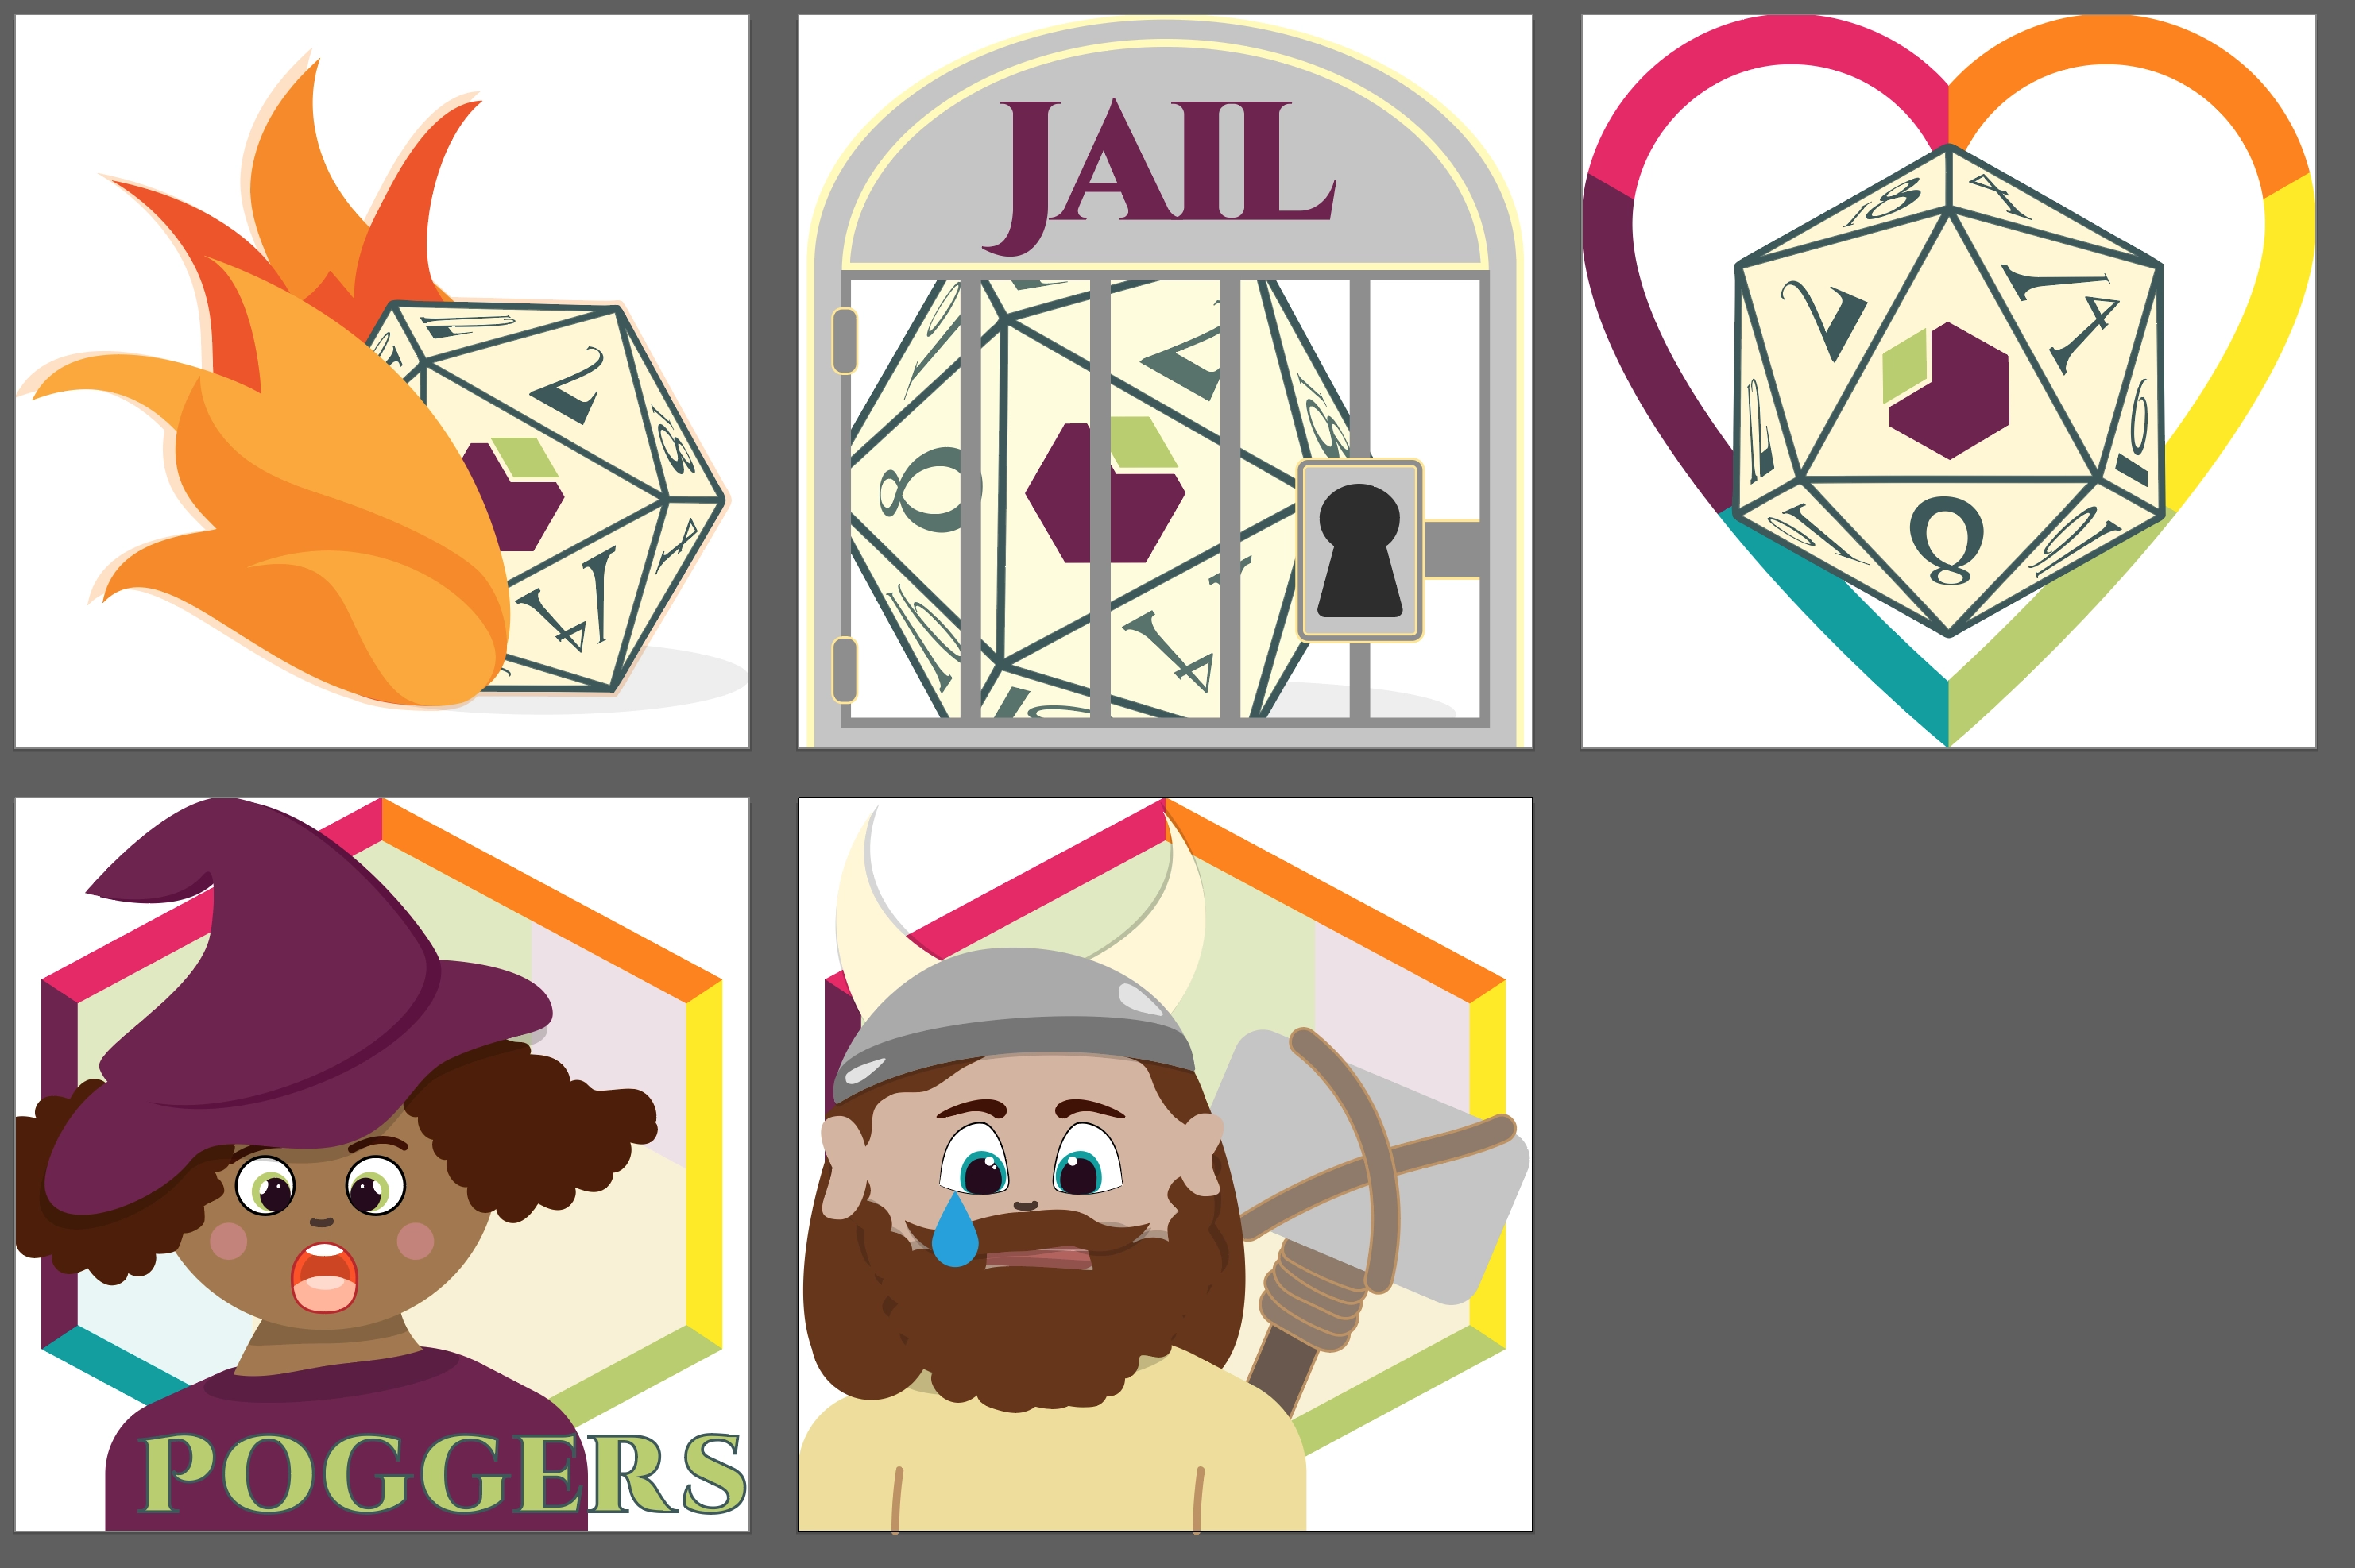 Emotes for Lore Link's Twitch stream, including a d20 on fire, a d20 in jail, a d20 surrounded by a rainbow heart, a wizard saying POGGERS, and a crying barbarian.